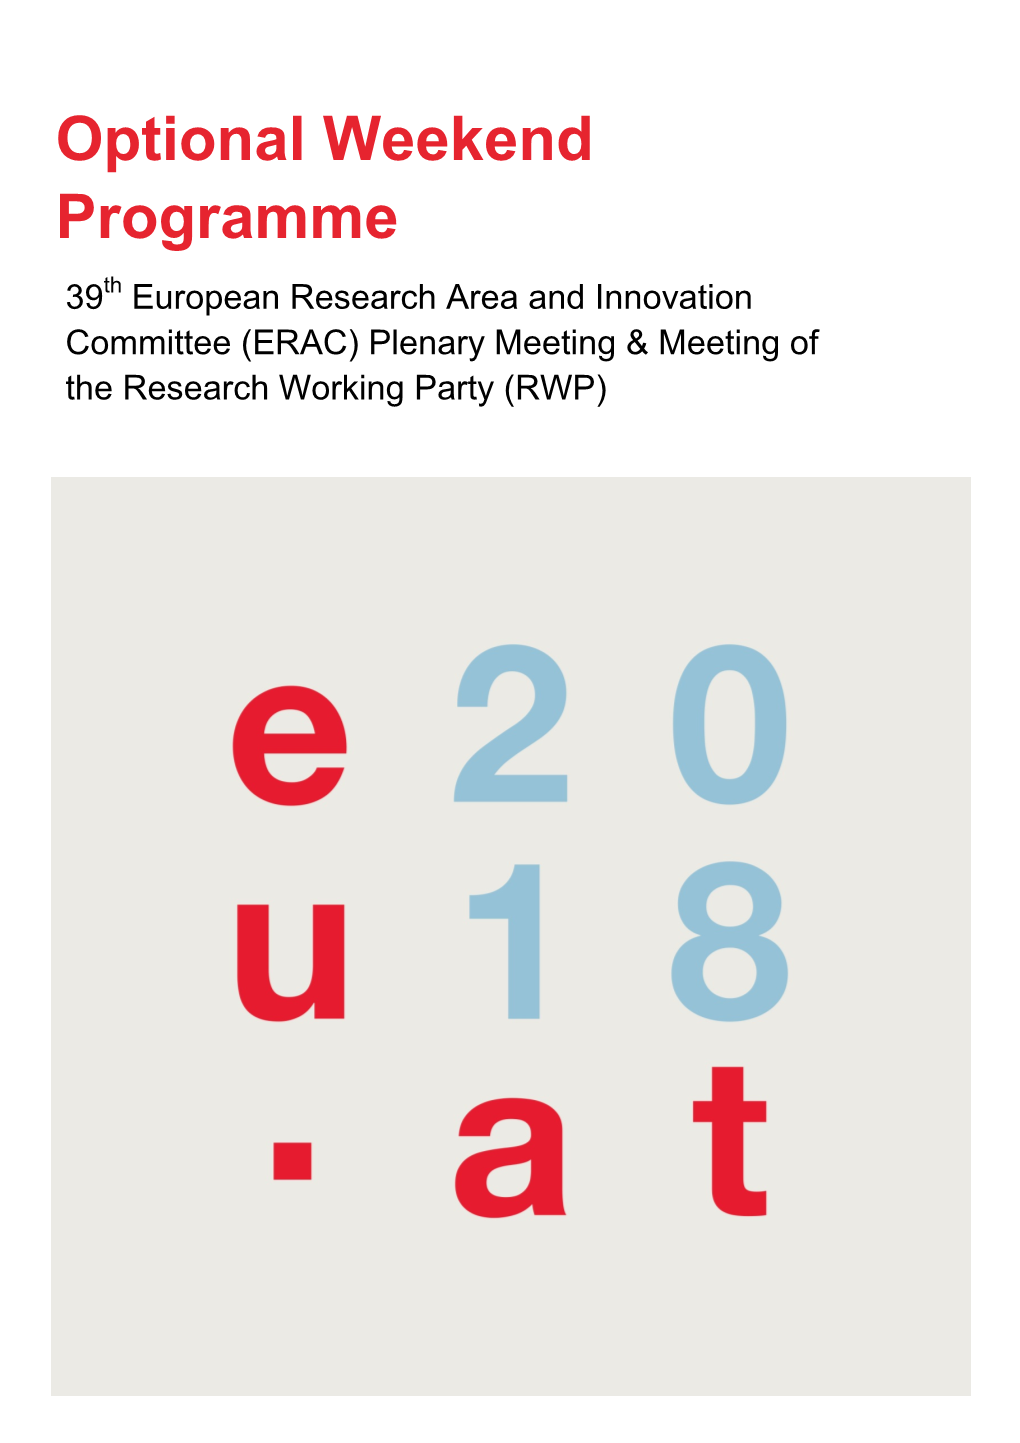 Optional Weekend Programme 39Th European Research Area and Innovation Committee (ERAC) Plenary Meeting & Meeting Of